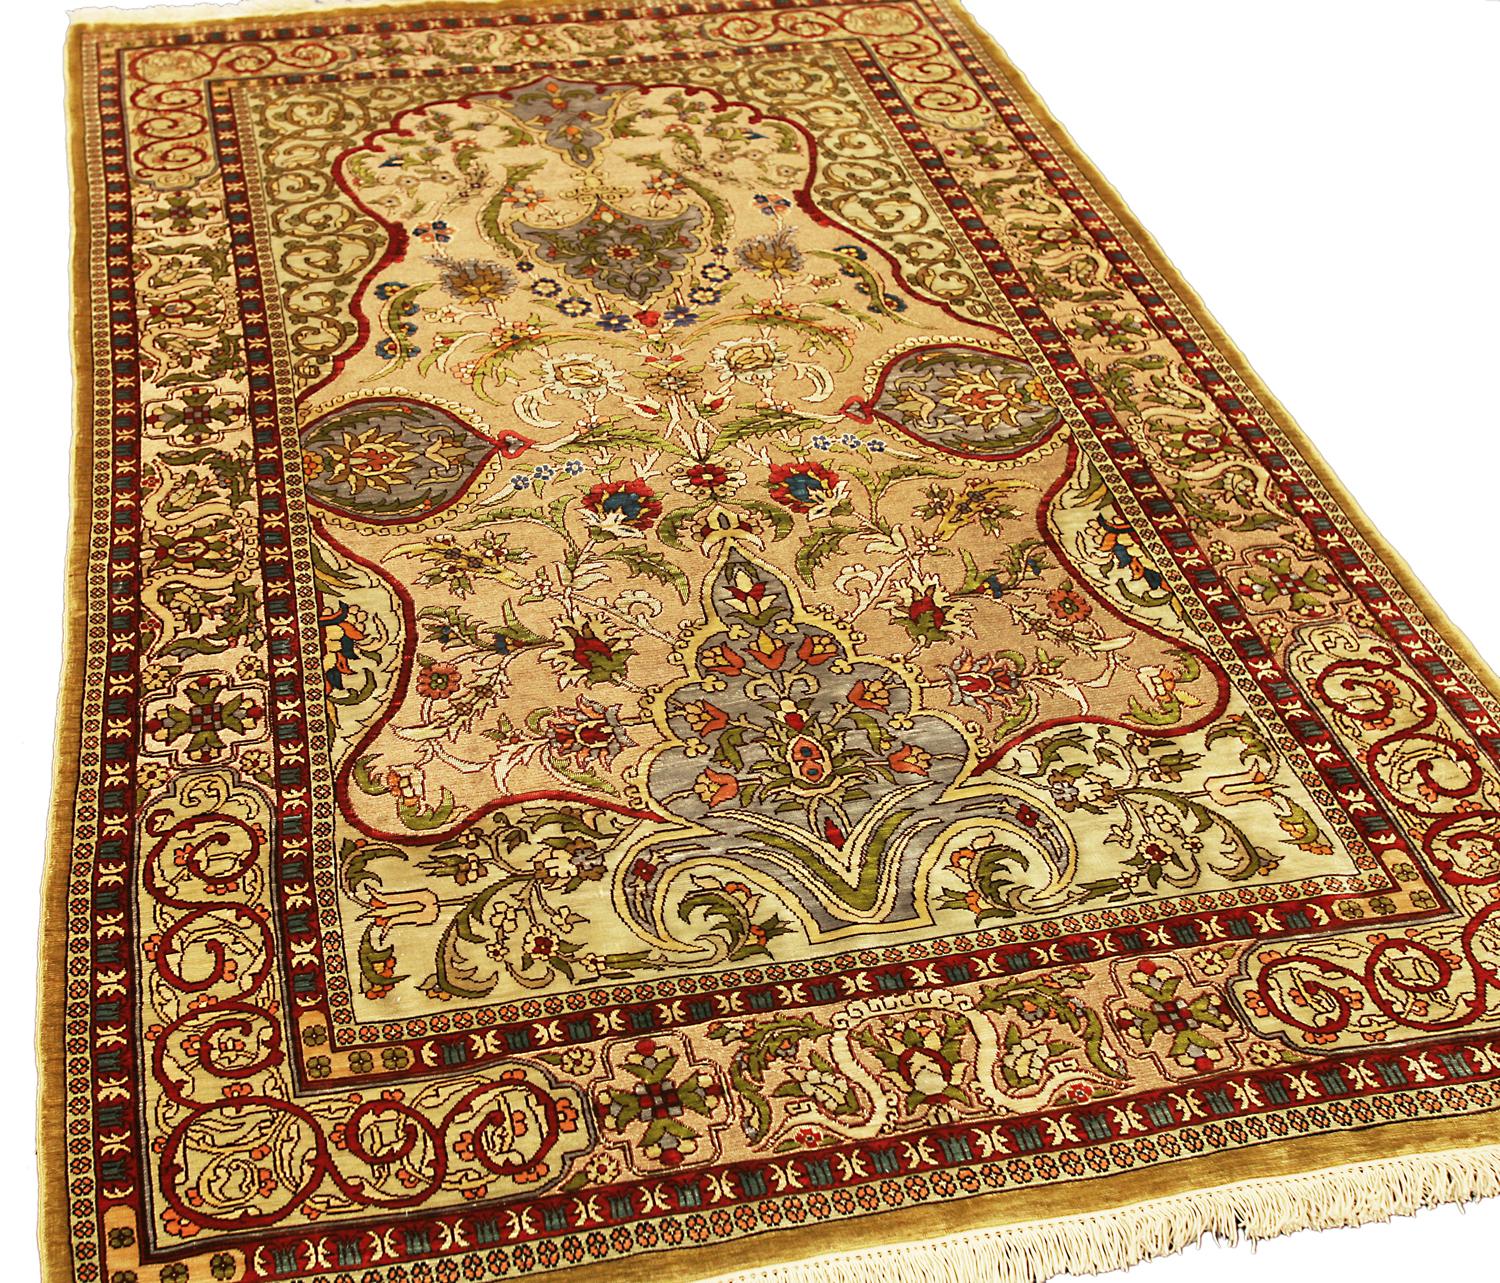 This is a silk and metal threaded Turkish Hereke rug woven in Turkey during the beginning of the 21st century circa 2000-2010 and measures 150 x 95 cm in size. 
The soft beige field with serrated palemttes, palette cartouches, polychrome floral